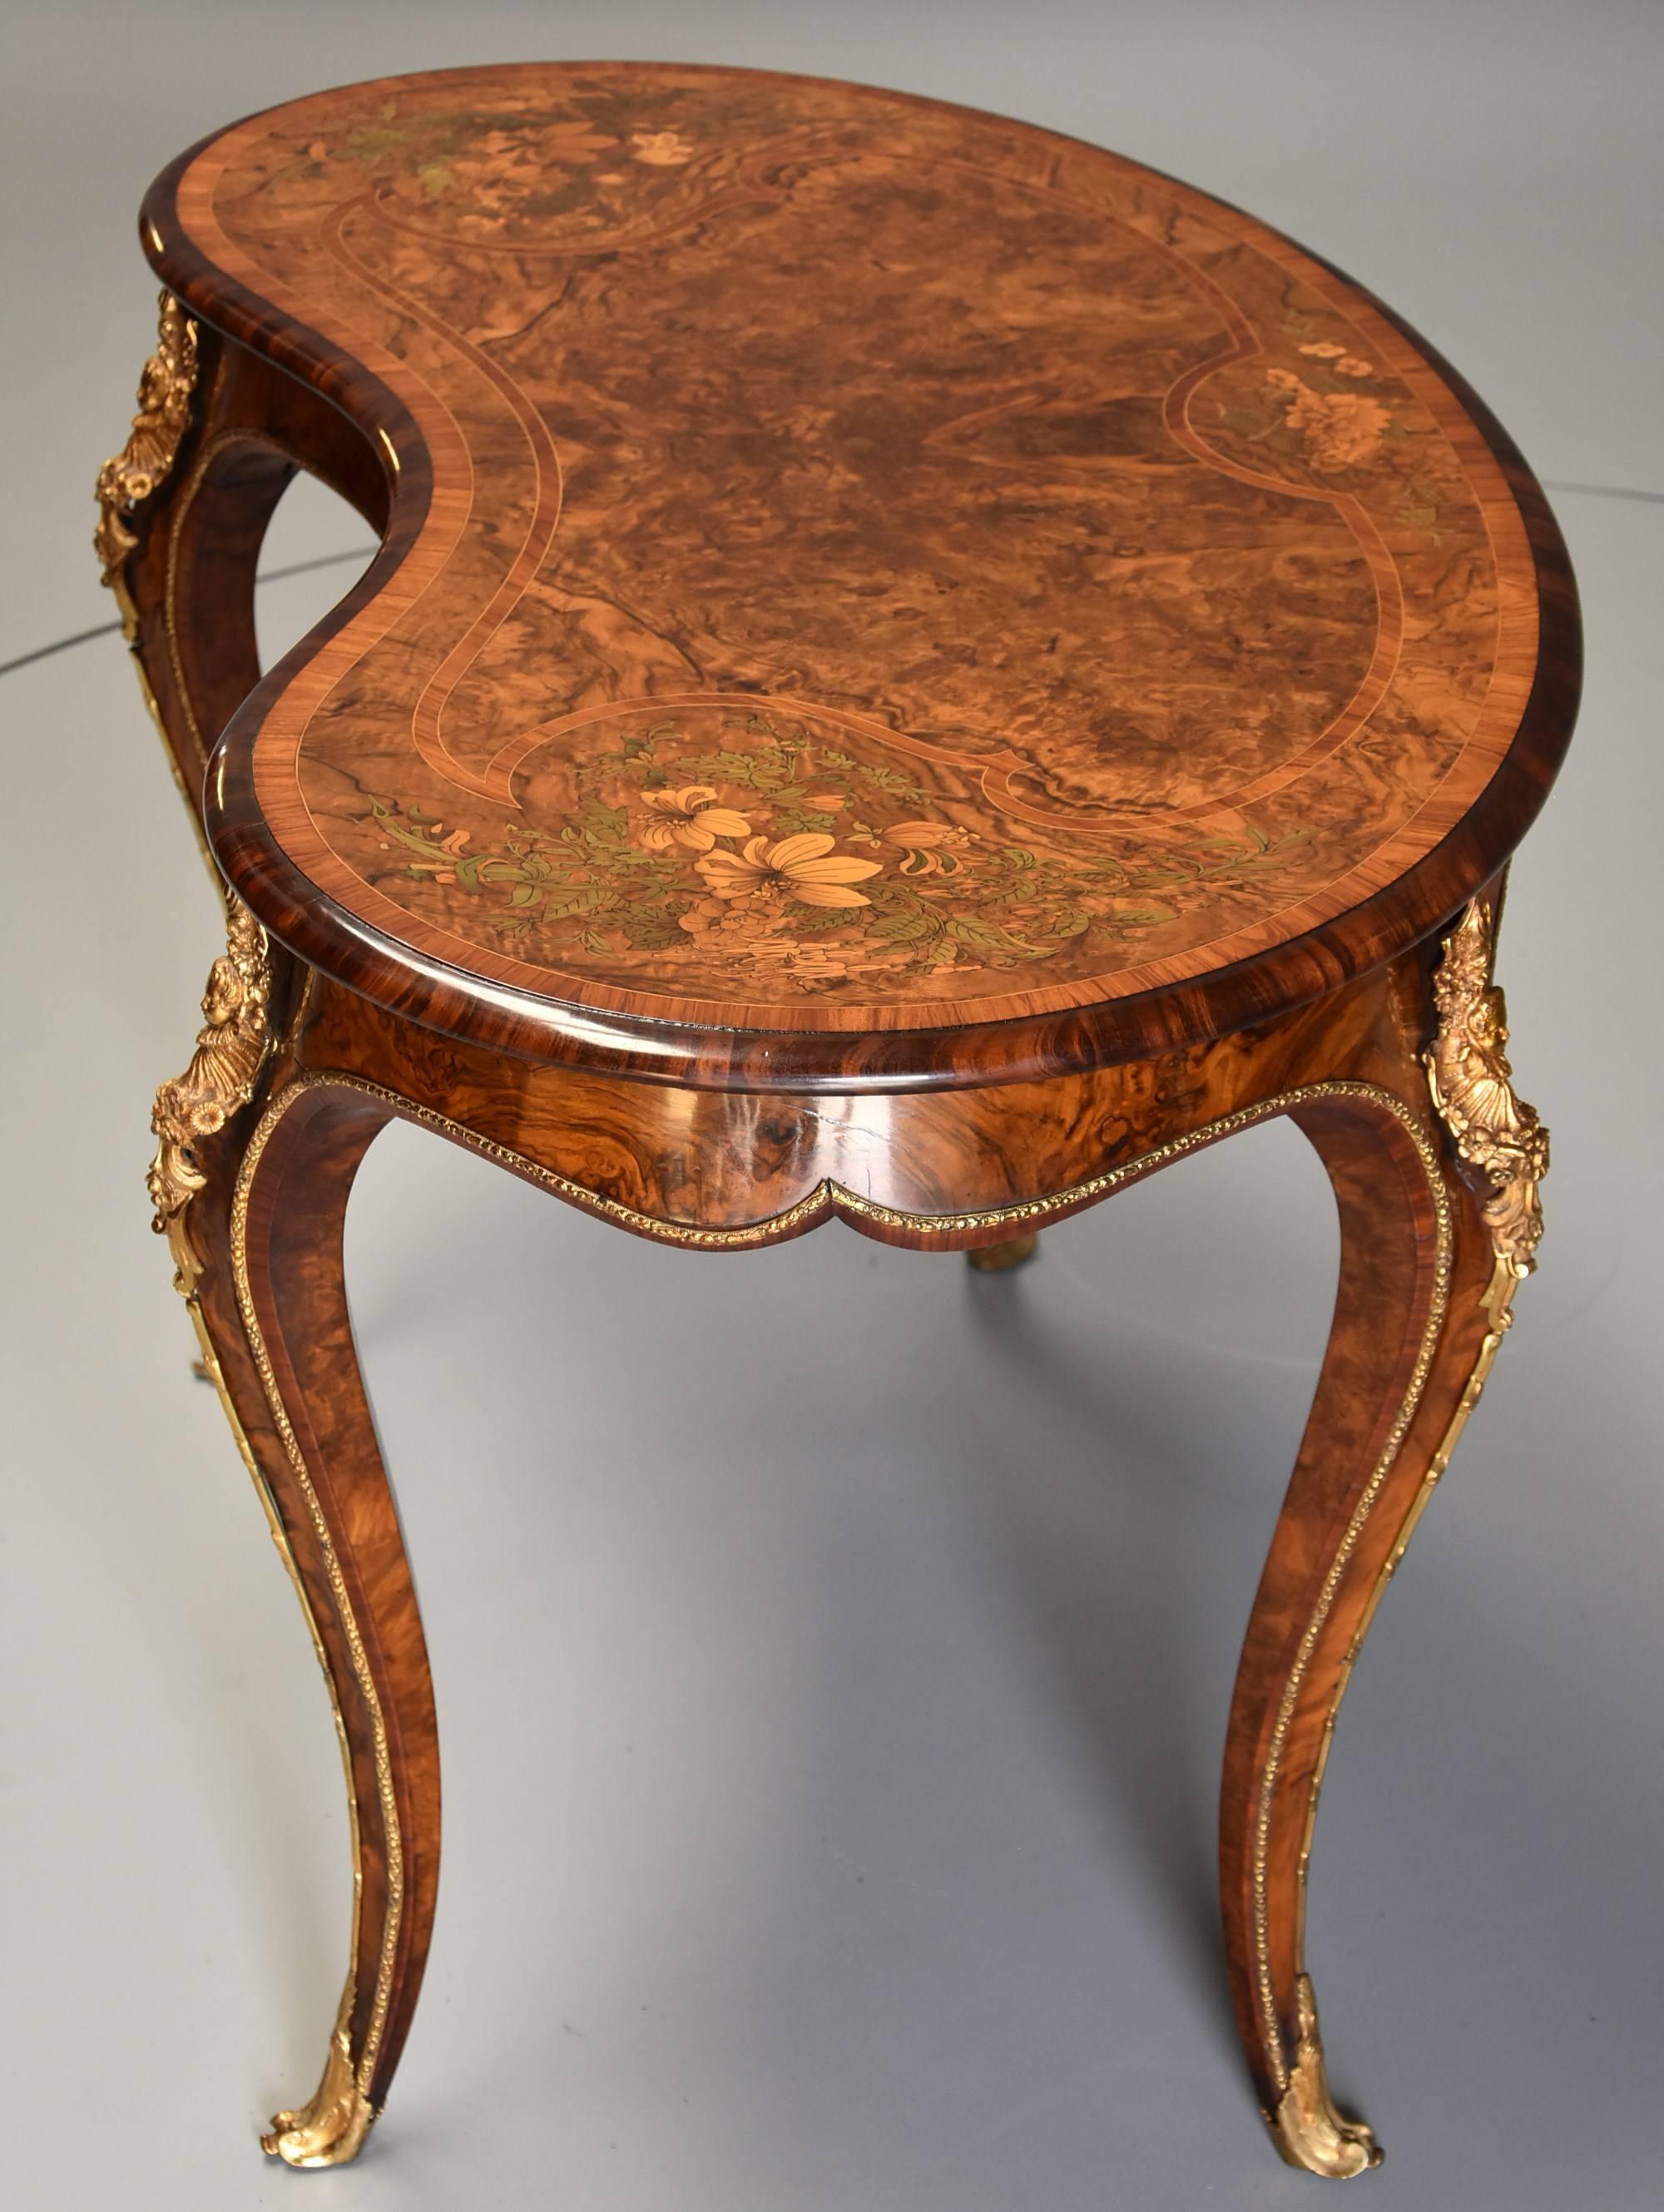 Superb Quality Mid-19th Century Burr Walnut and Marquetry Kidney Shape Table For Sale 1